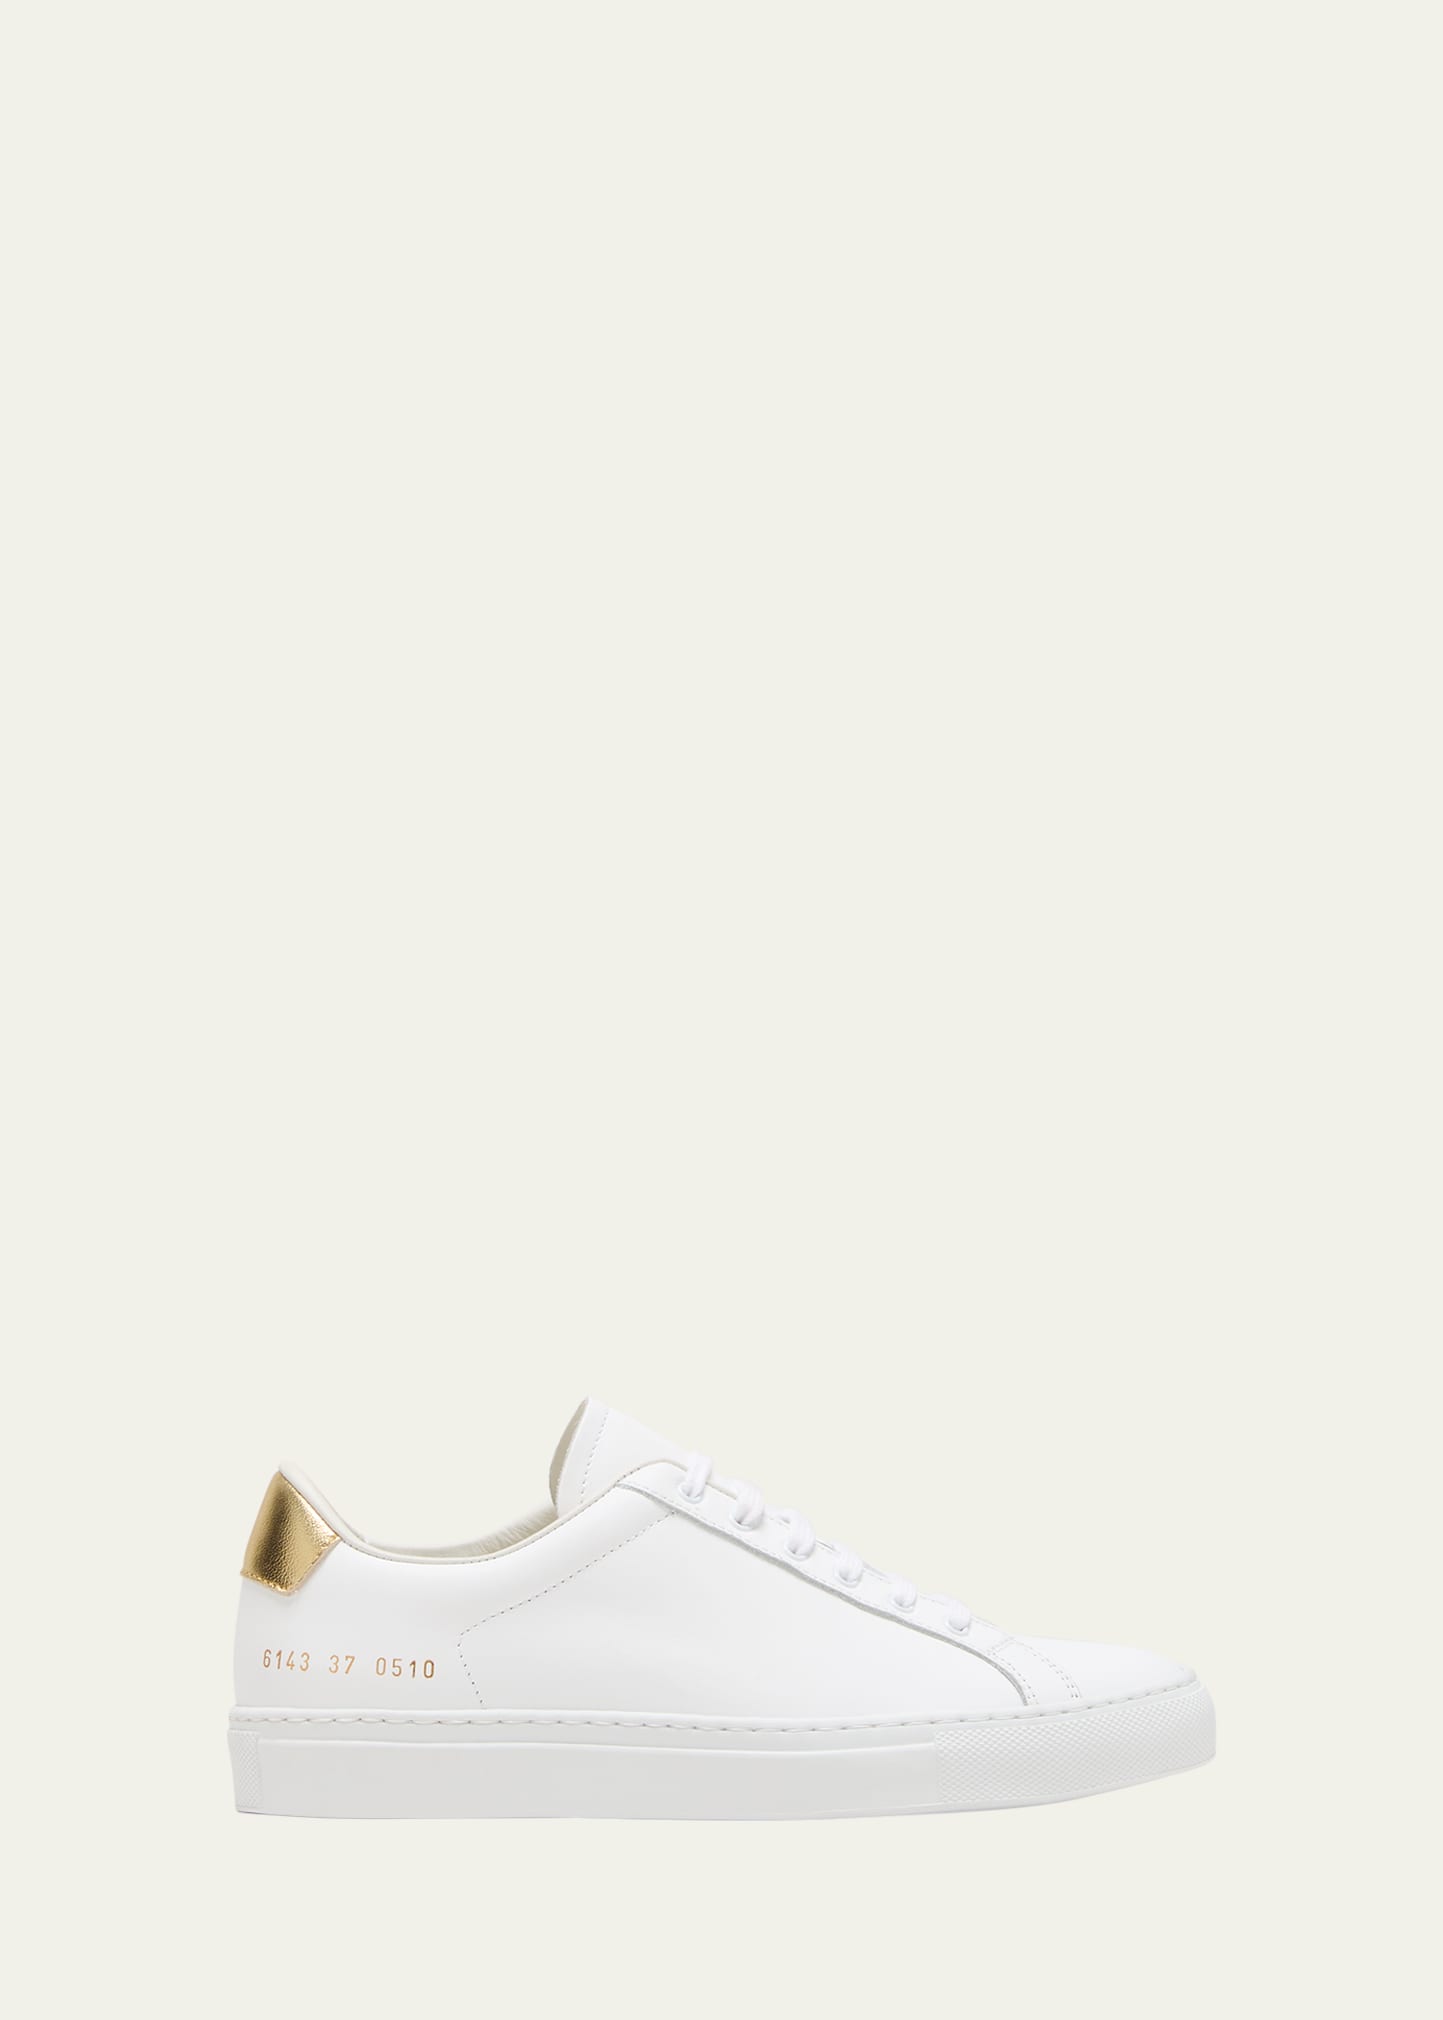 Shop Common Projects Retro Leather Low-top Sneakers In 0510 - White / Go